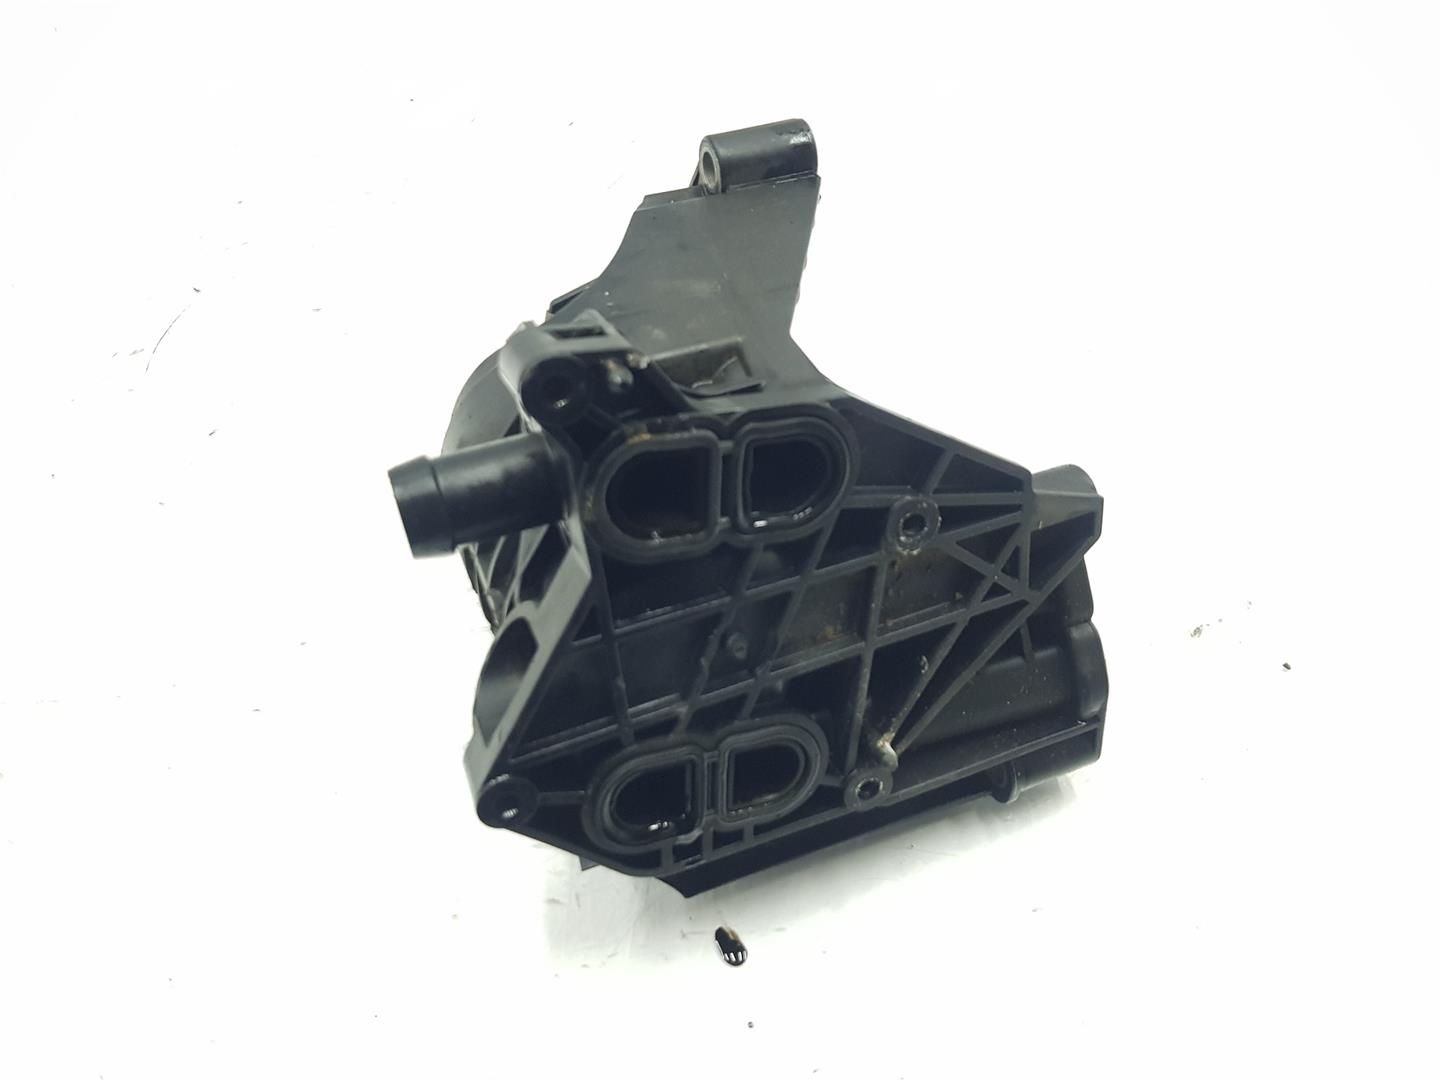 VOLKSWAGEN Passat B8 (2014-2023) Other Engine Compartment Parts 03N115389A, 03N115389A, 2222DL 19799273